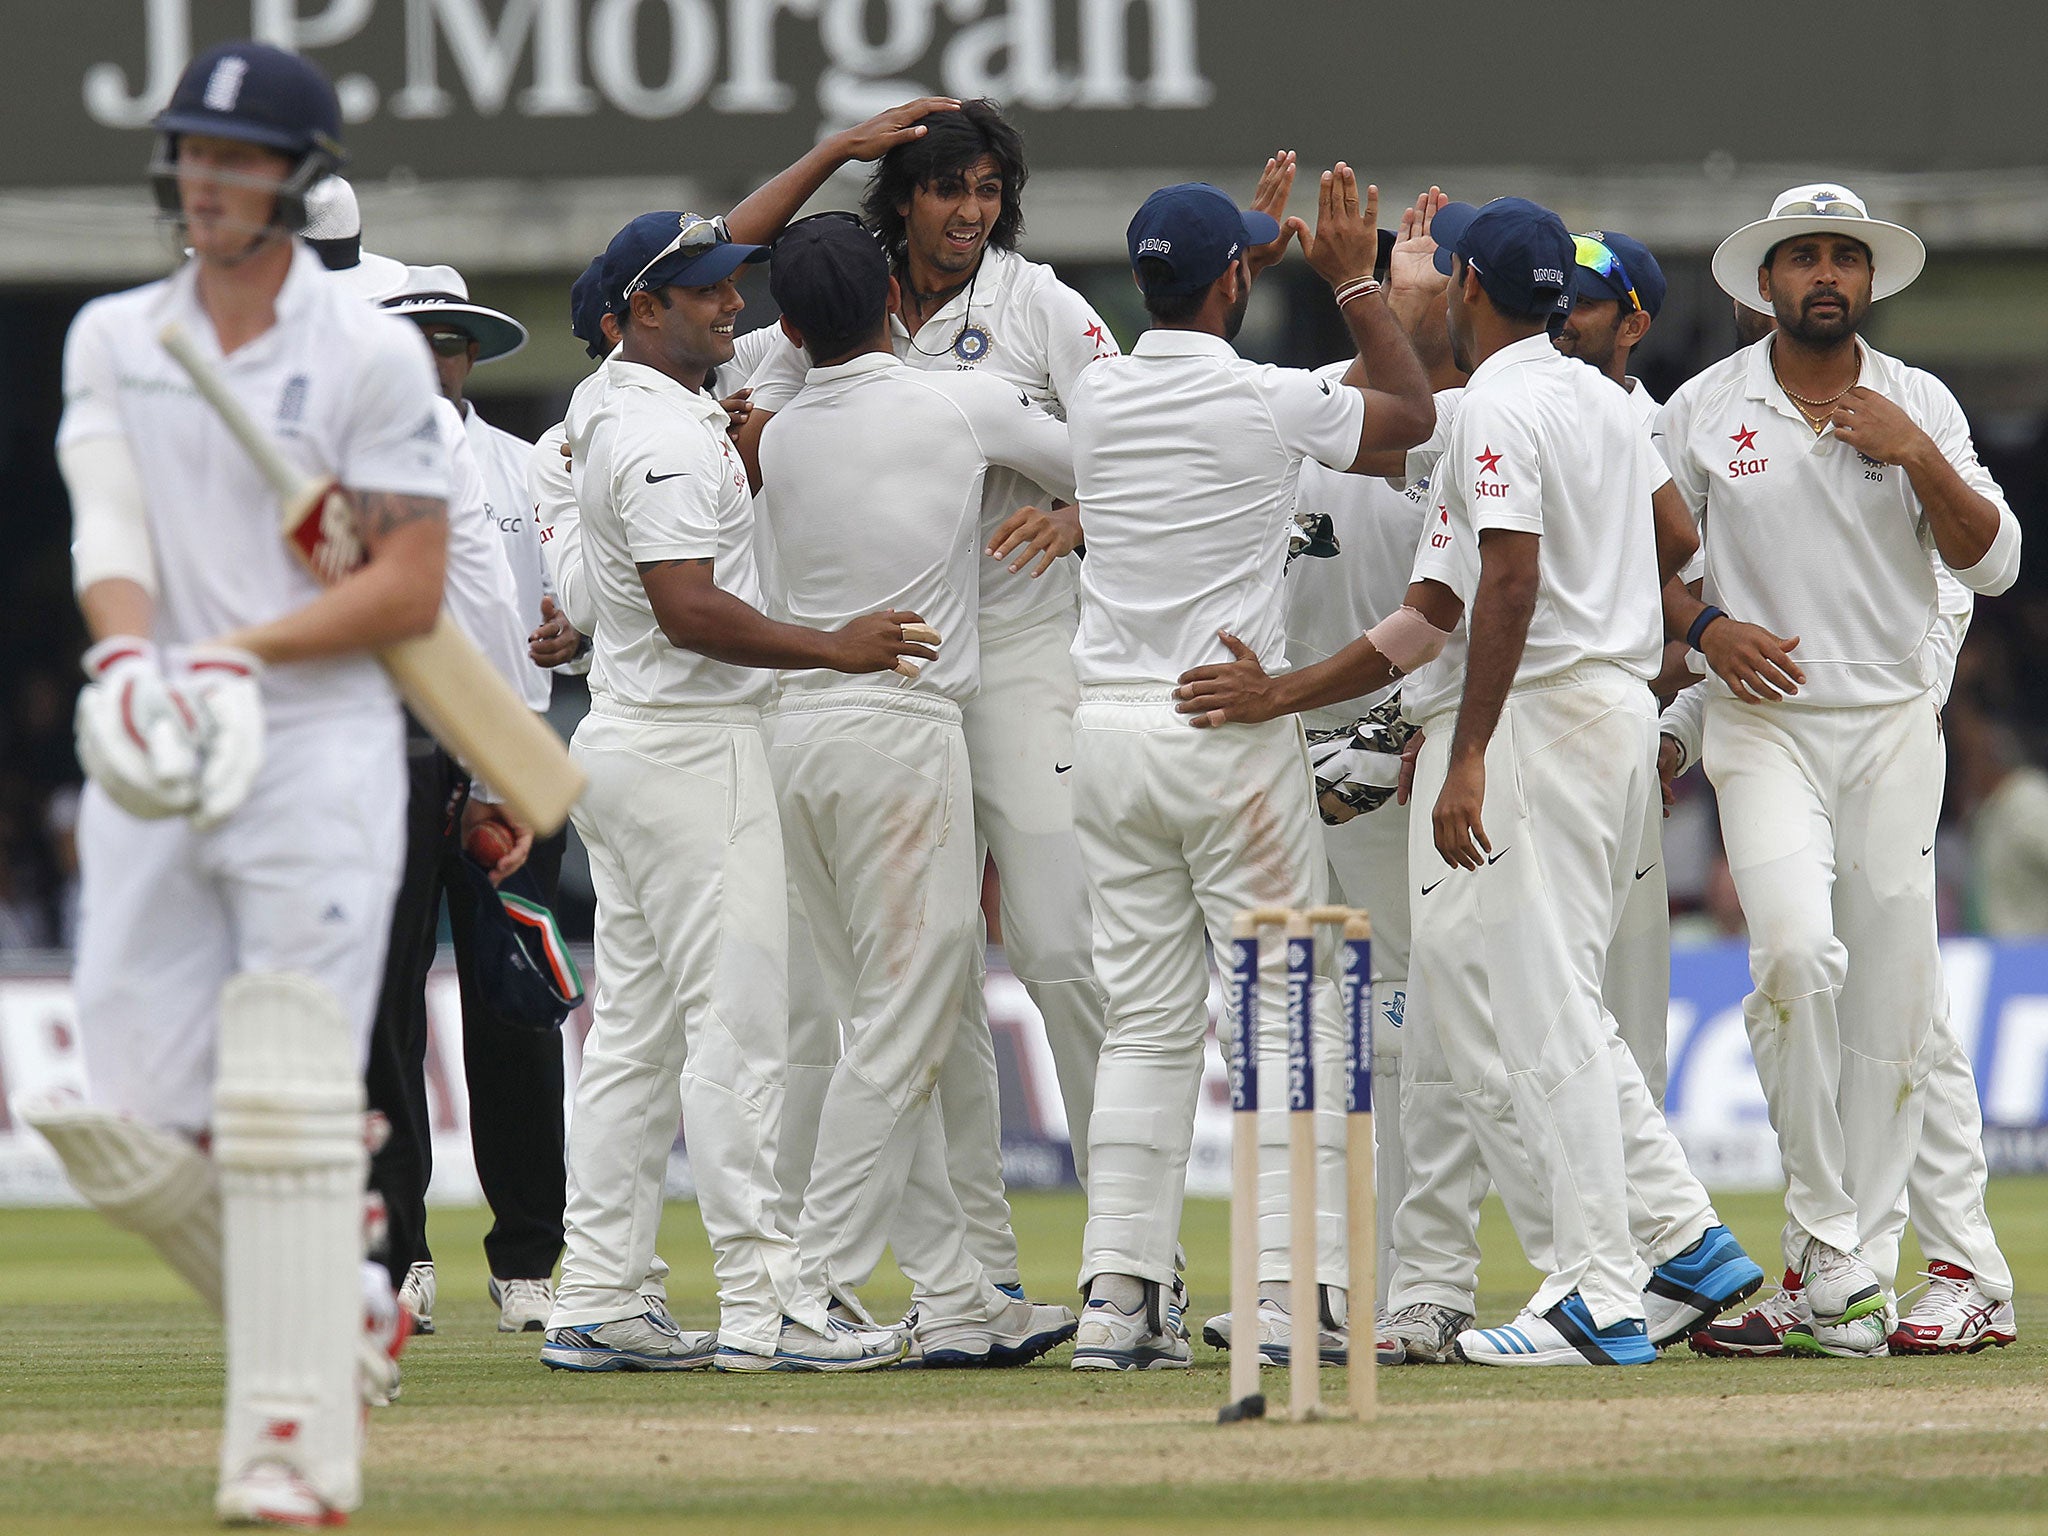 Ben Stokes trudges off after his latest batting failure for England as Ishant Sharma celebrates one of his seven wickets